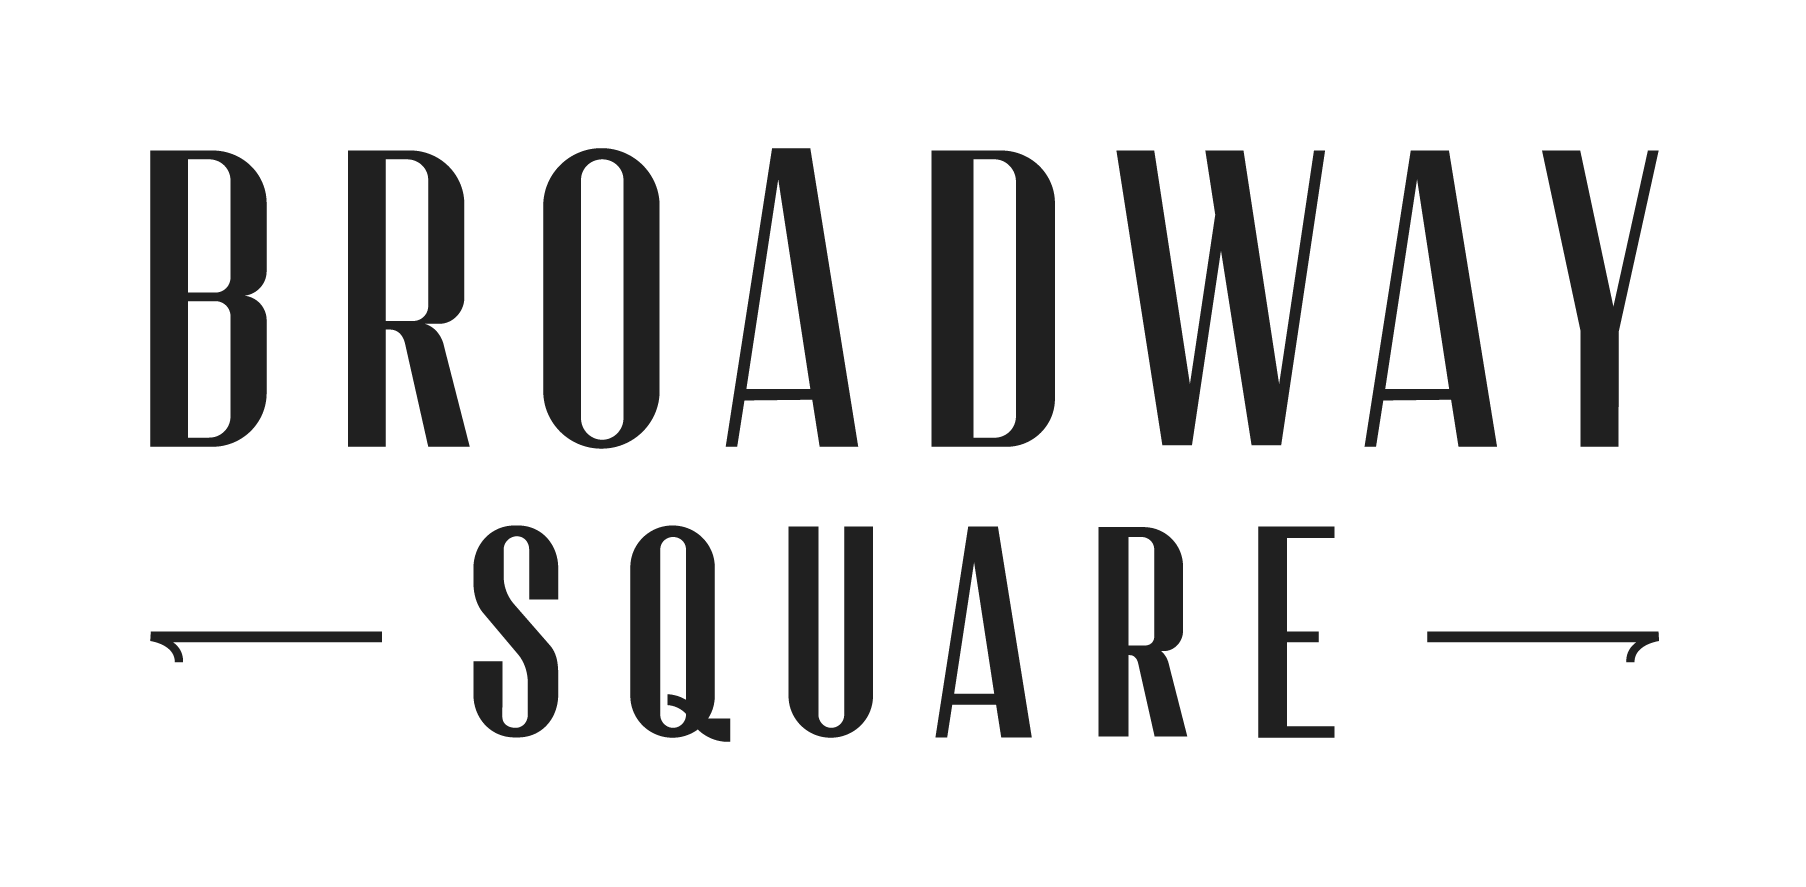 This image shows the Broadway Square logo.